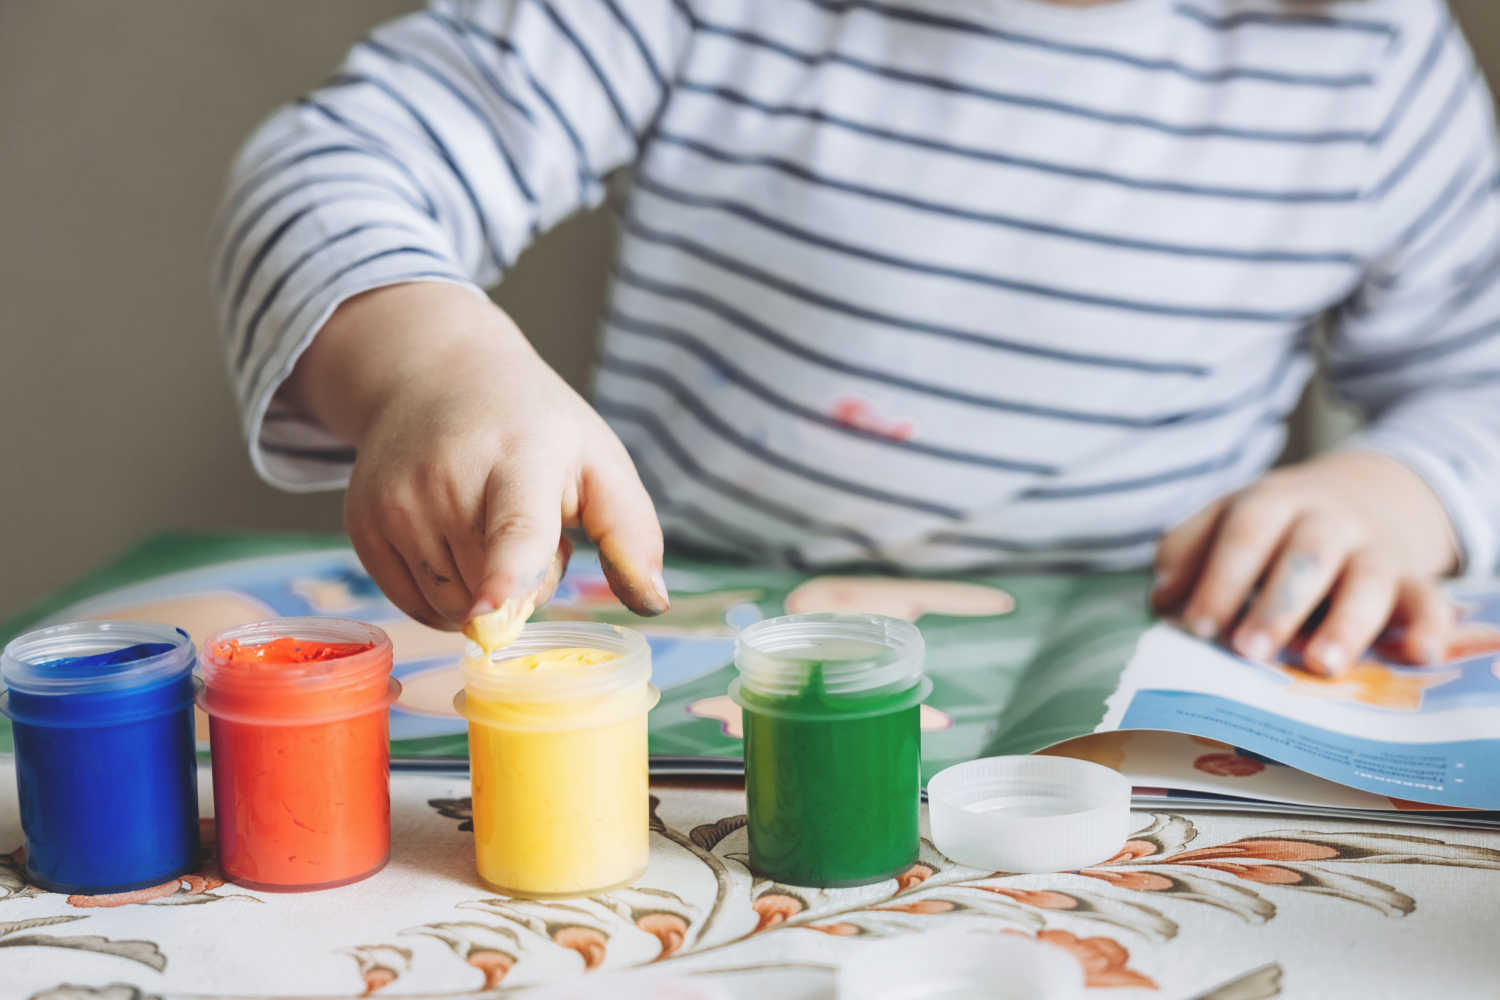 Paint is Safe to Use on a Baby's Hand